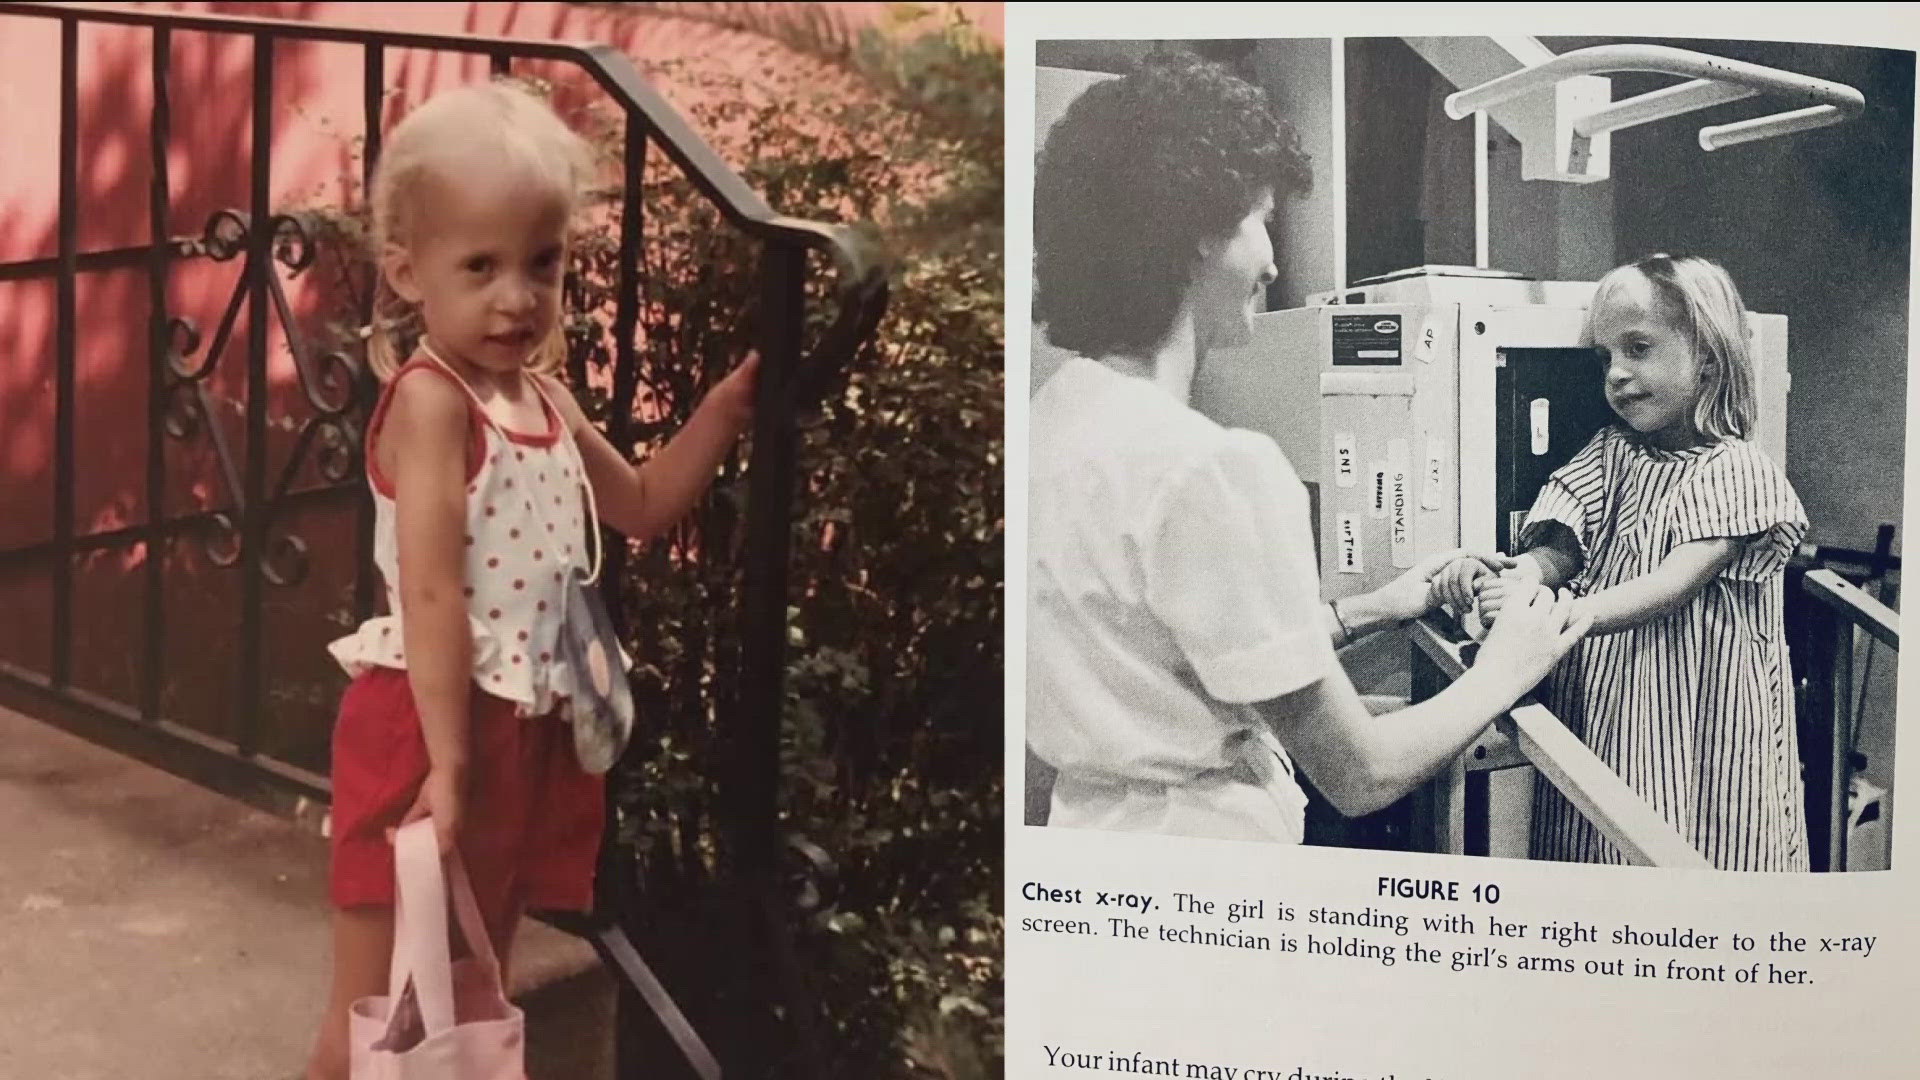 In today's good news, Sarah celebrates 39 years since she underwent open-heart surgery at the age of 5.